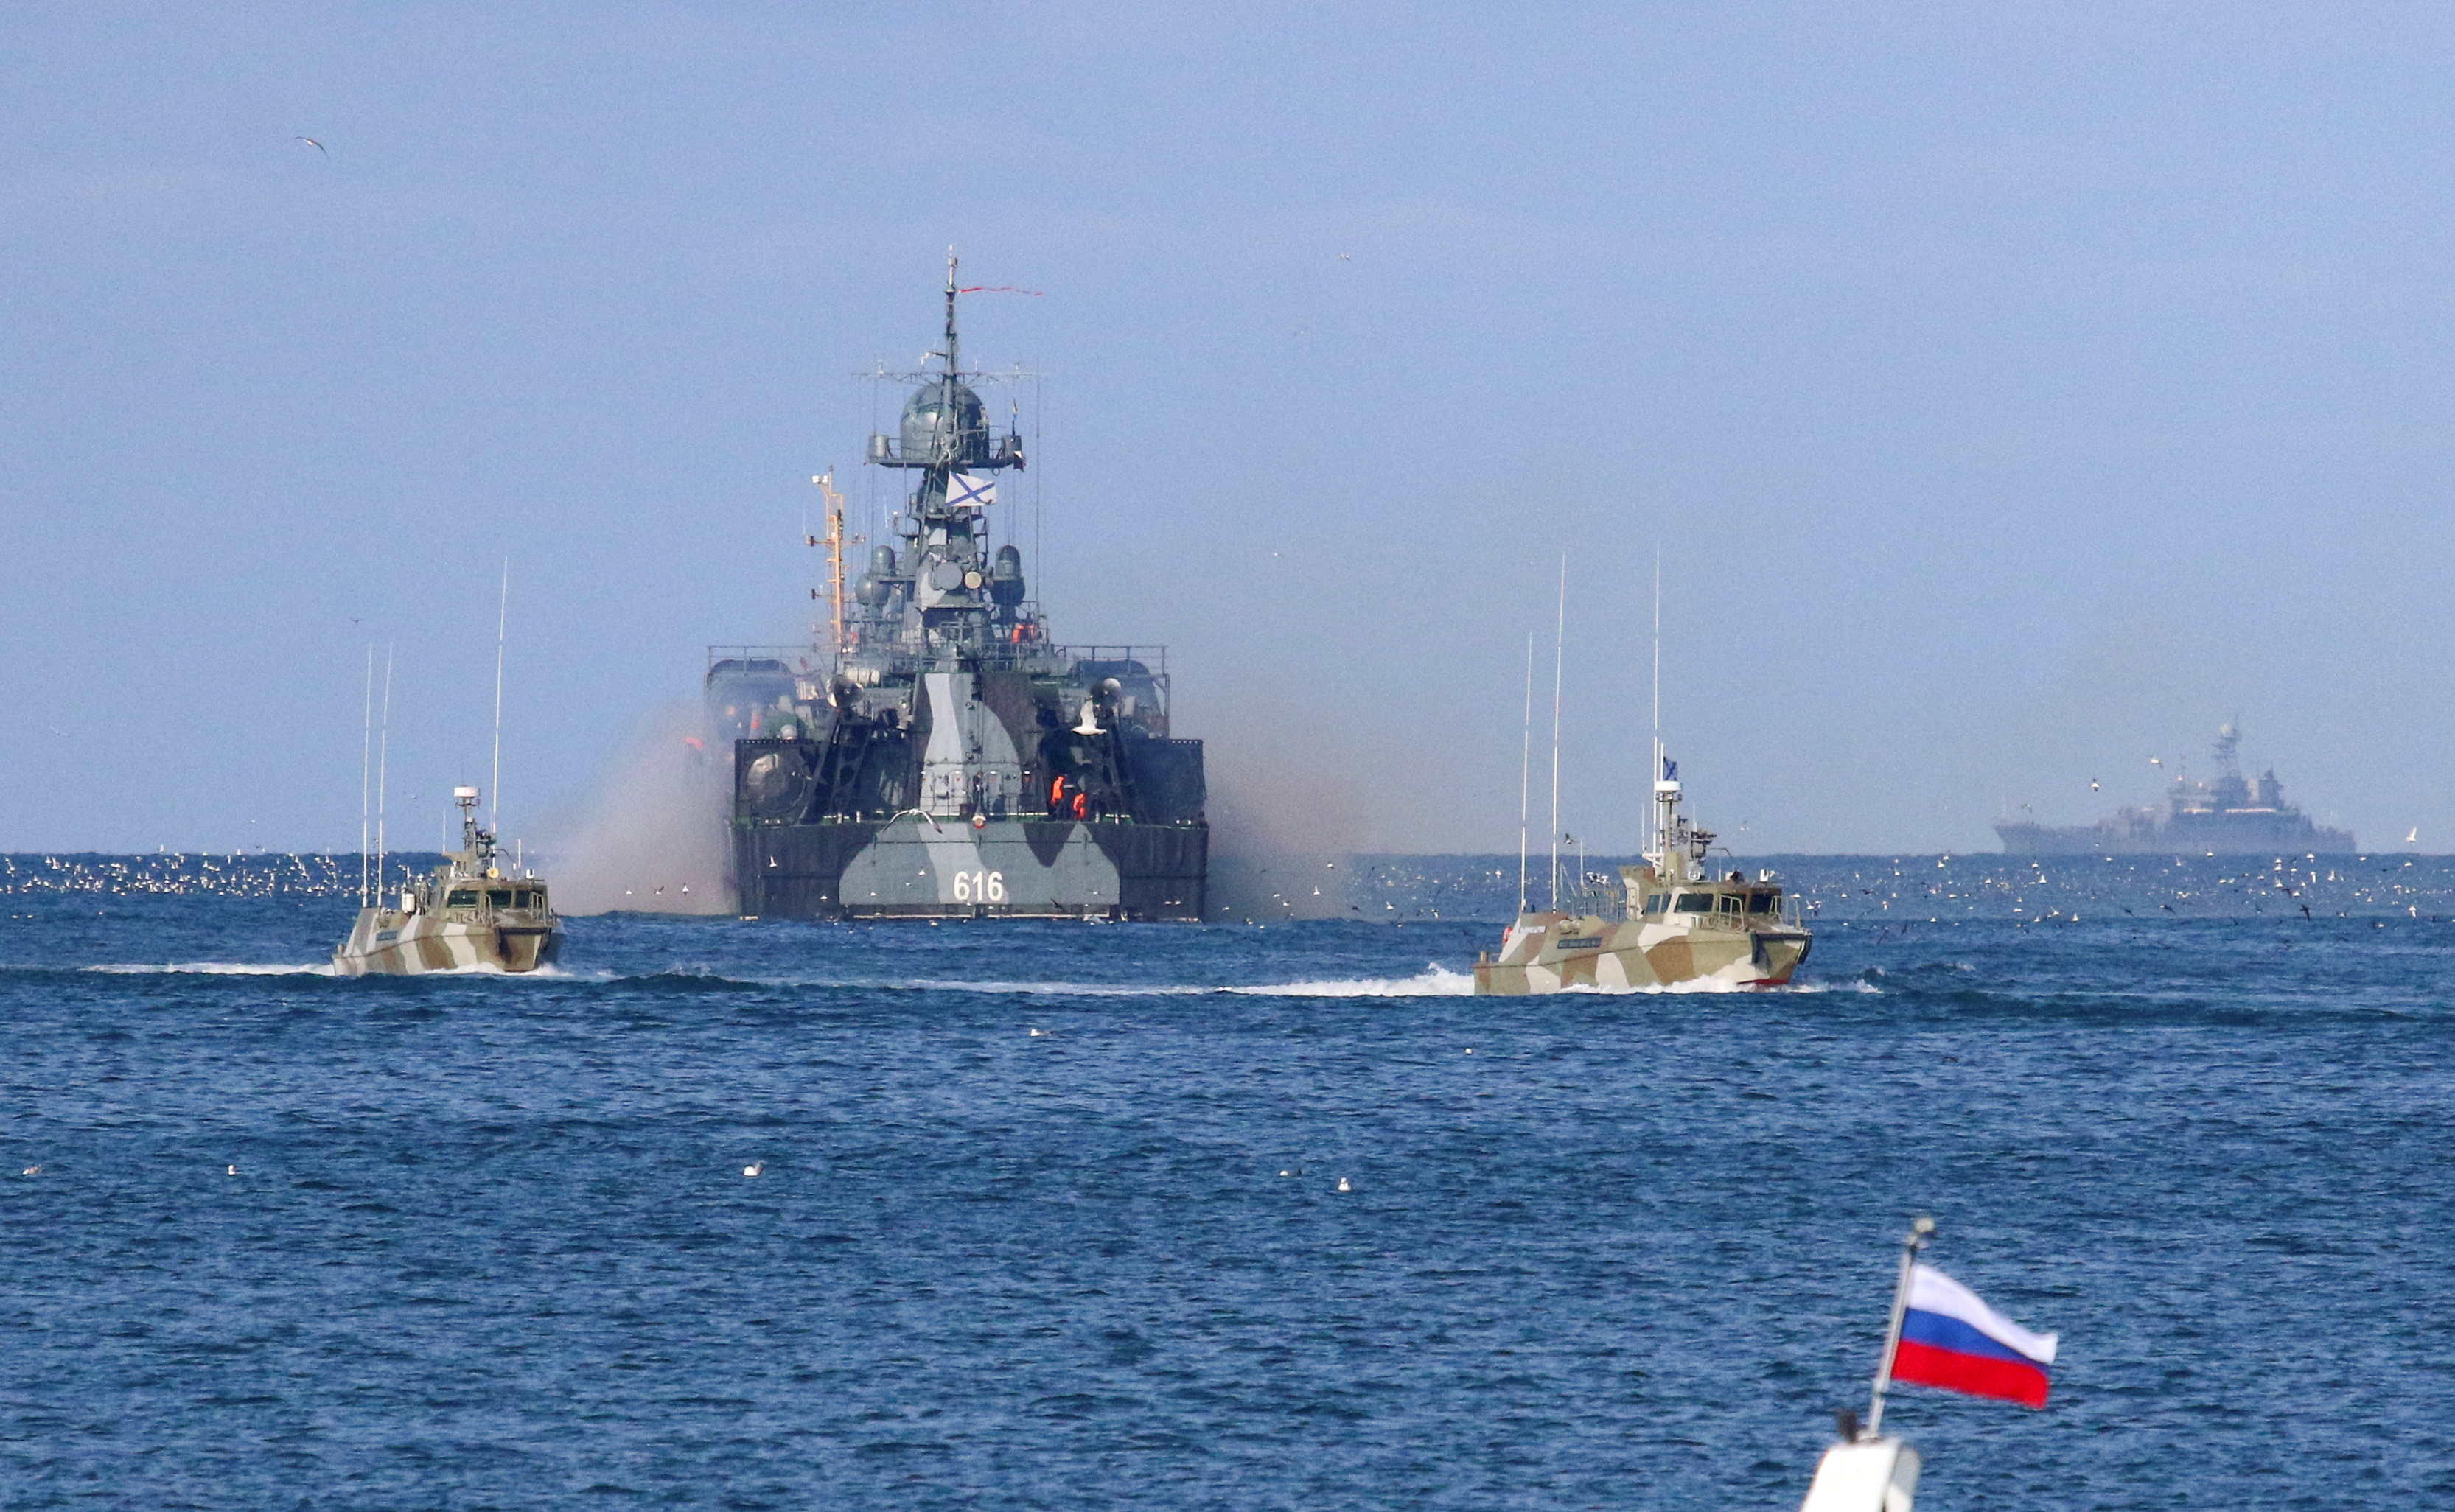 A view shows the Russian Navy's vessels near Sevastopol